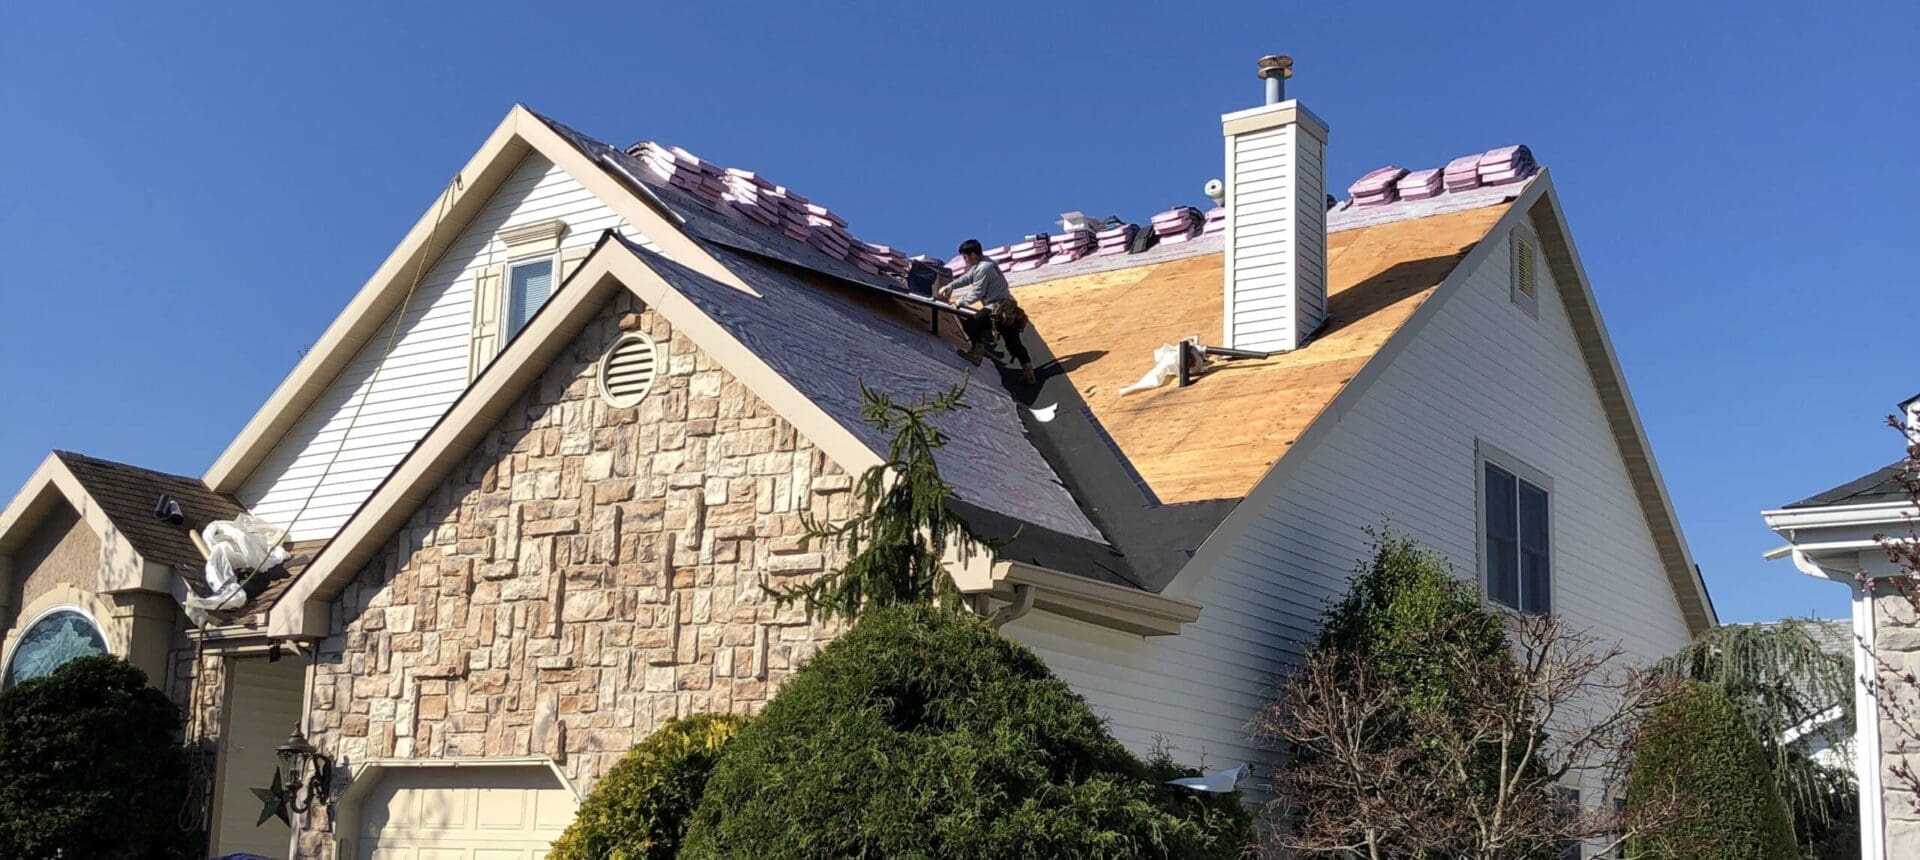 A house with a roof that has been damaged.